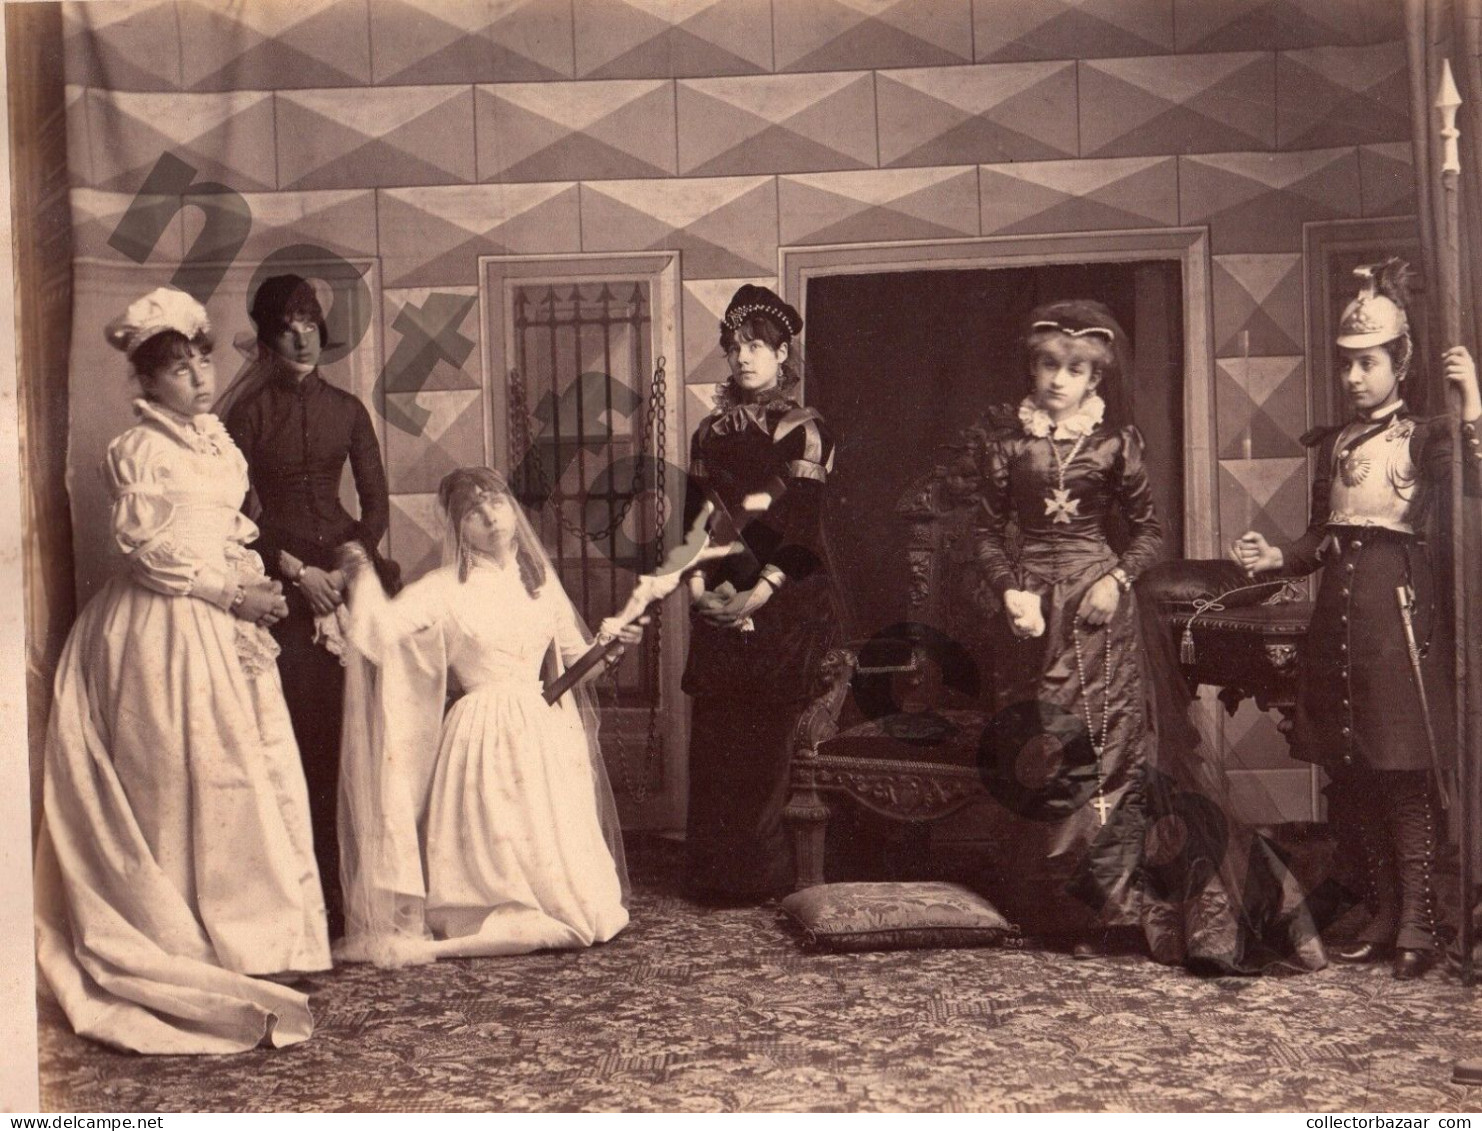 RR 1870 3 photos original Victorian youth Takes the Stage: Children's Theatrical Delights in Early 20th Century Uruguay